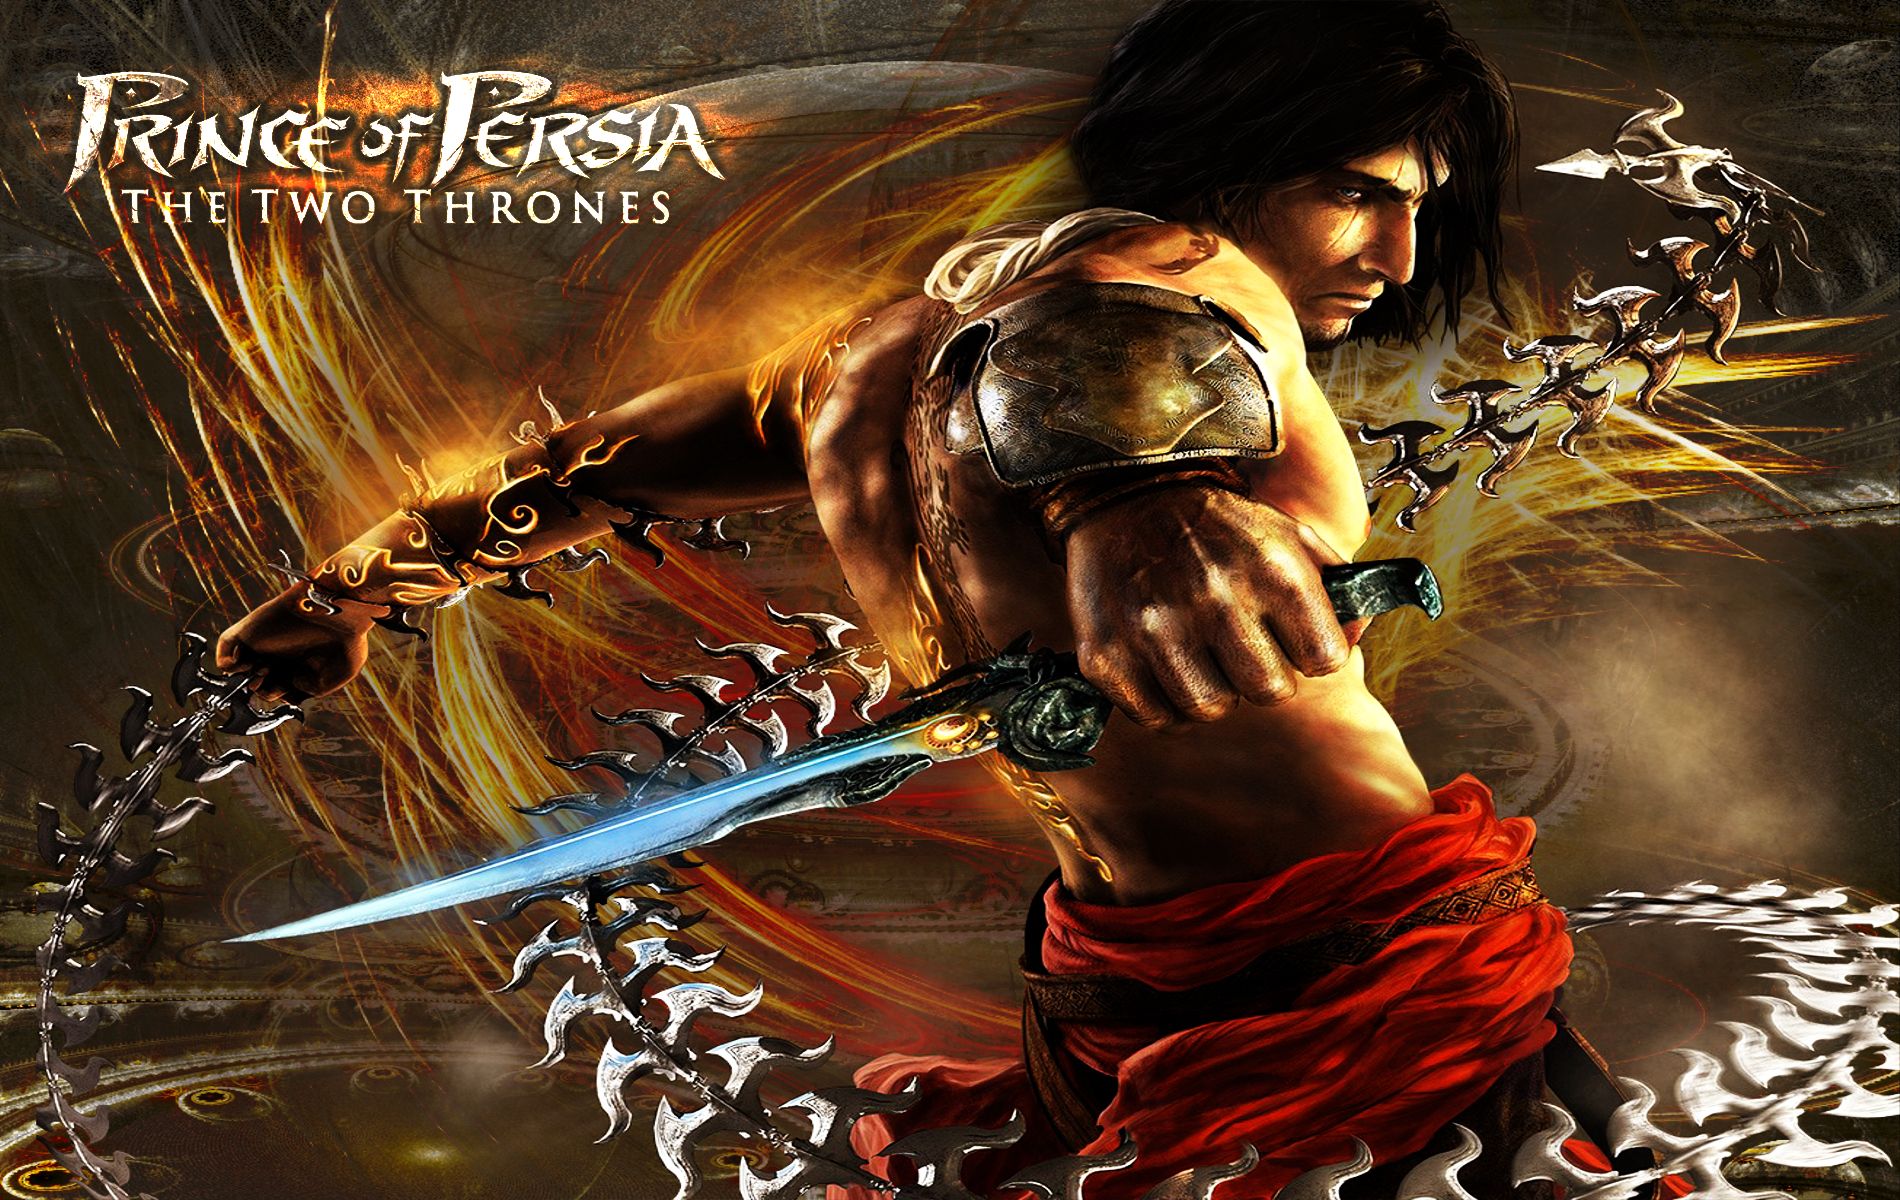 Prince Of Persia HD Wallpapers